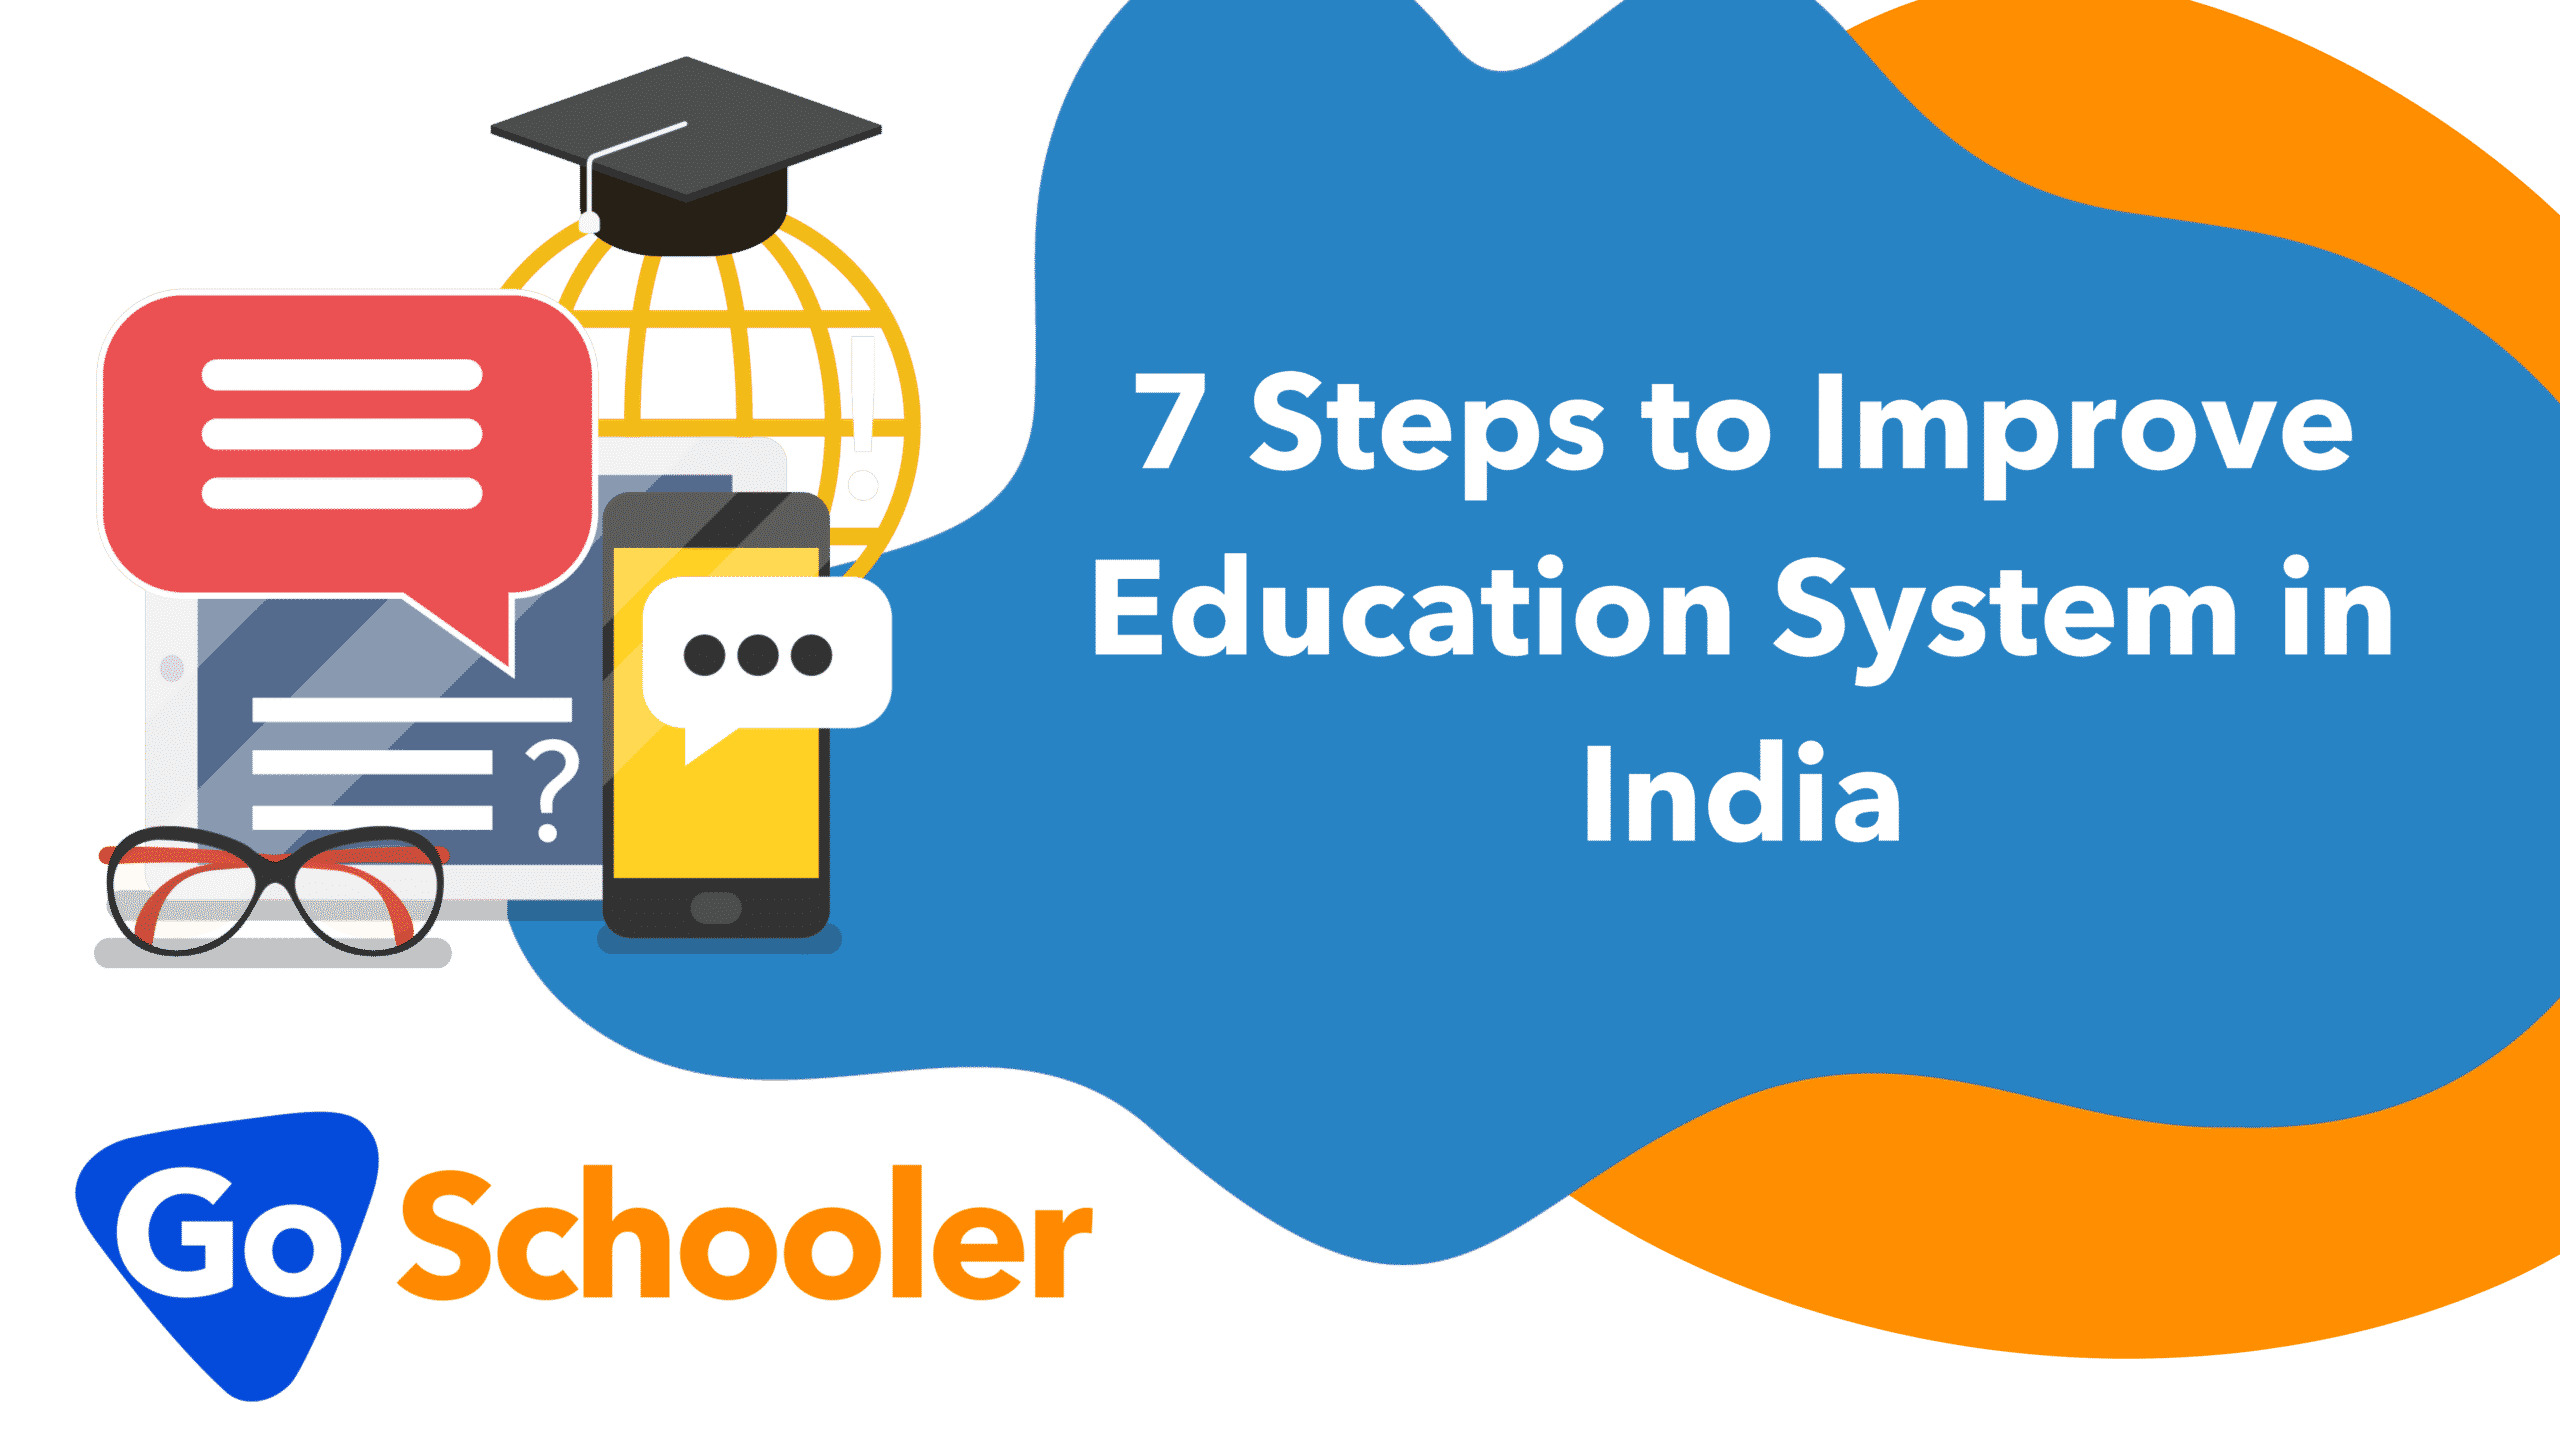 Steps to Improve Education System in India